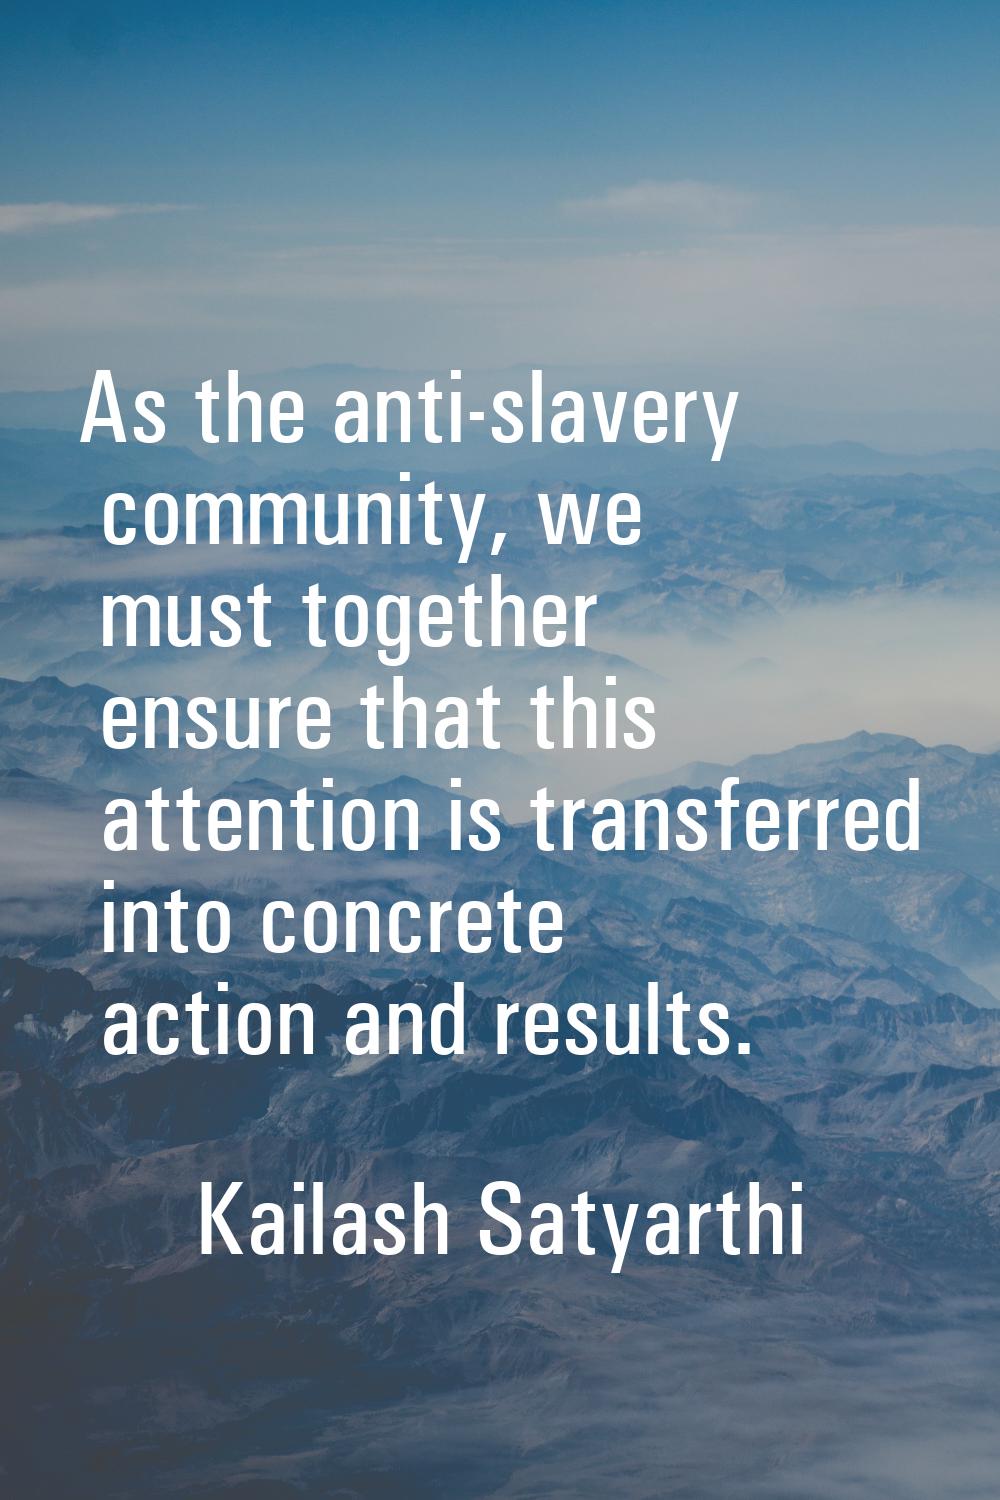 As the anti-slavery community, we must together ensure that this attention is transferred into conc